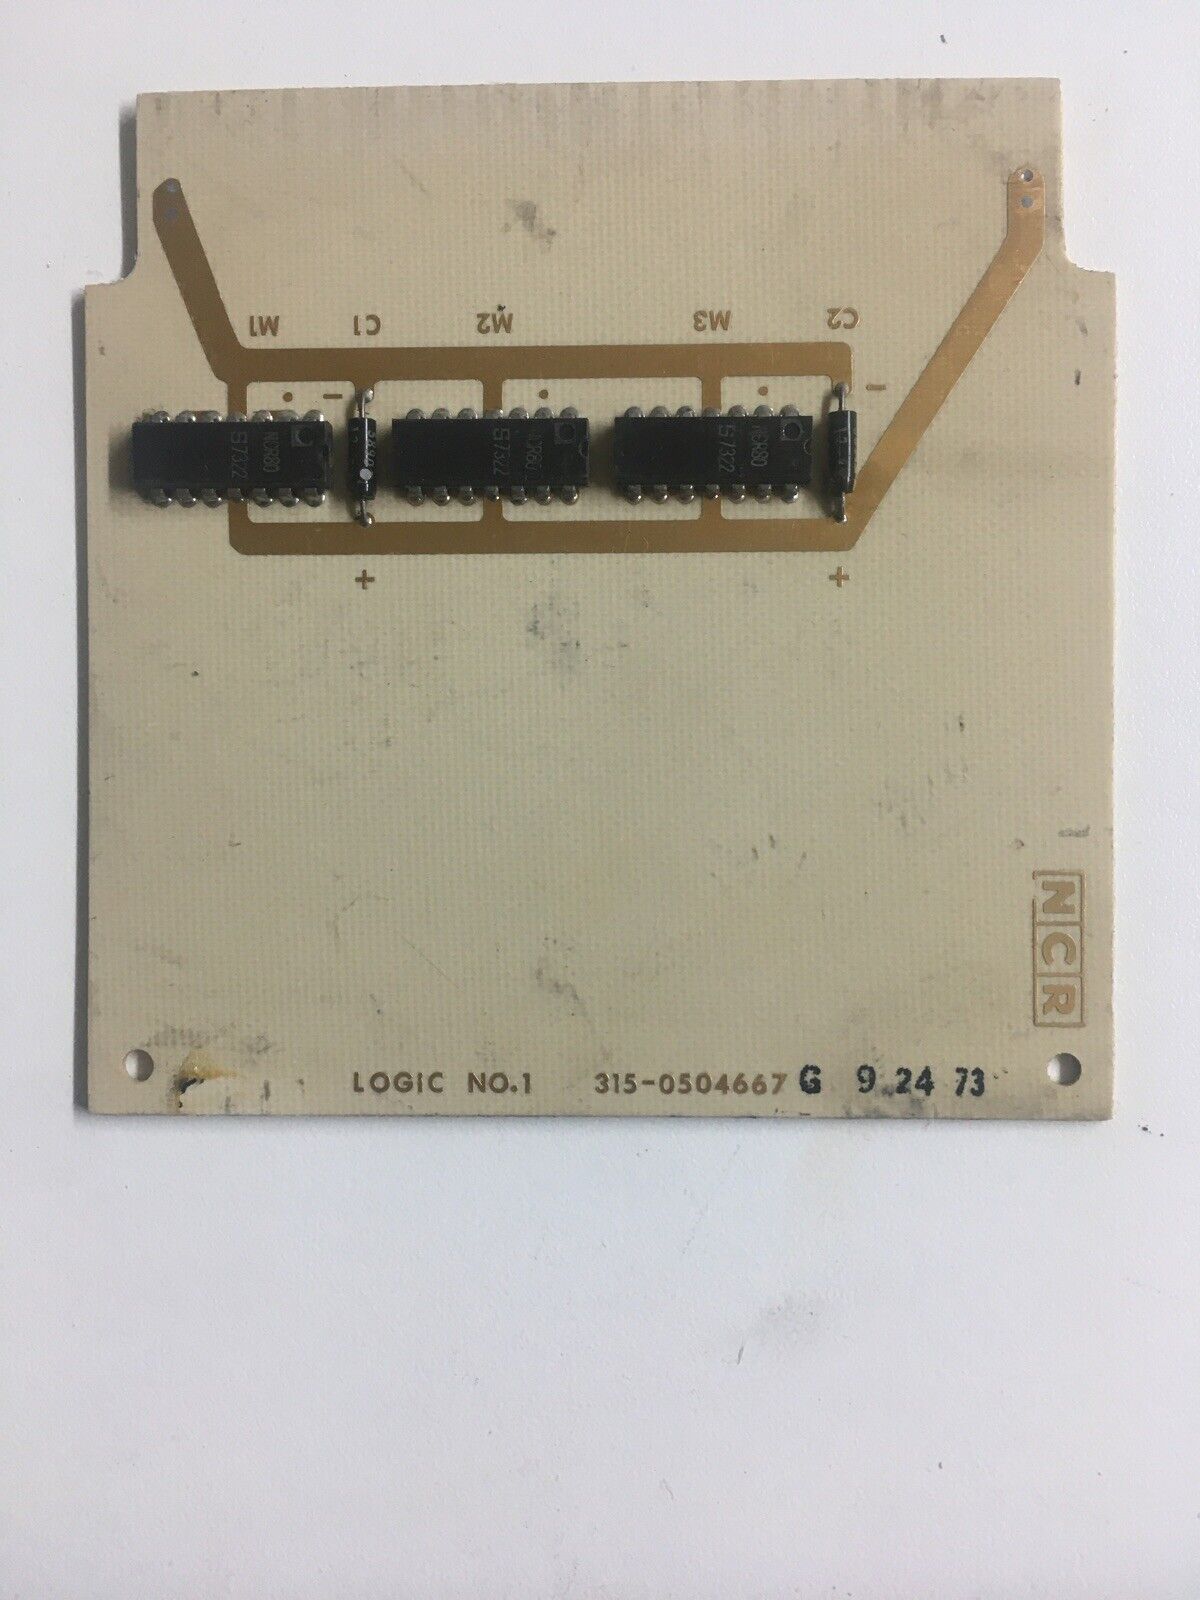 VERY RARE 1968 NCR SYSTEM 100 GOLD PLATED LOGIC NO. 1 CIRCUIT BOARD PCB CARD